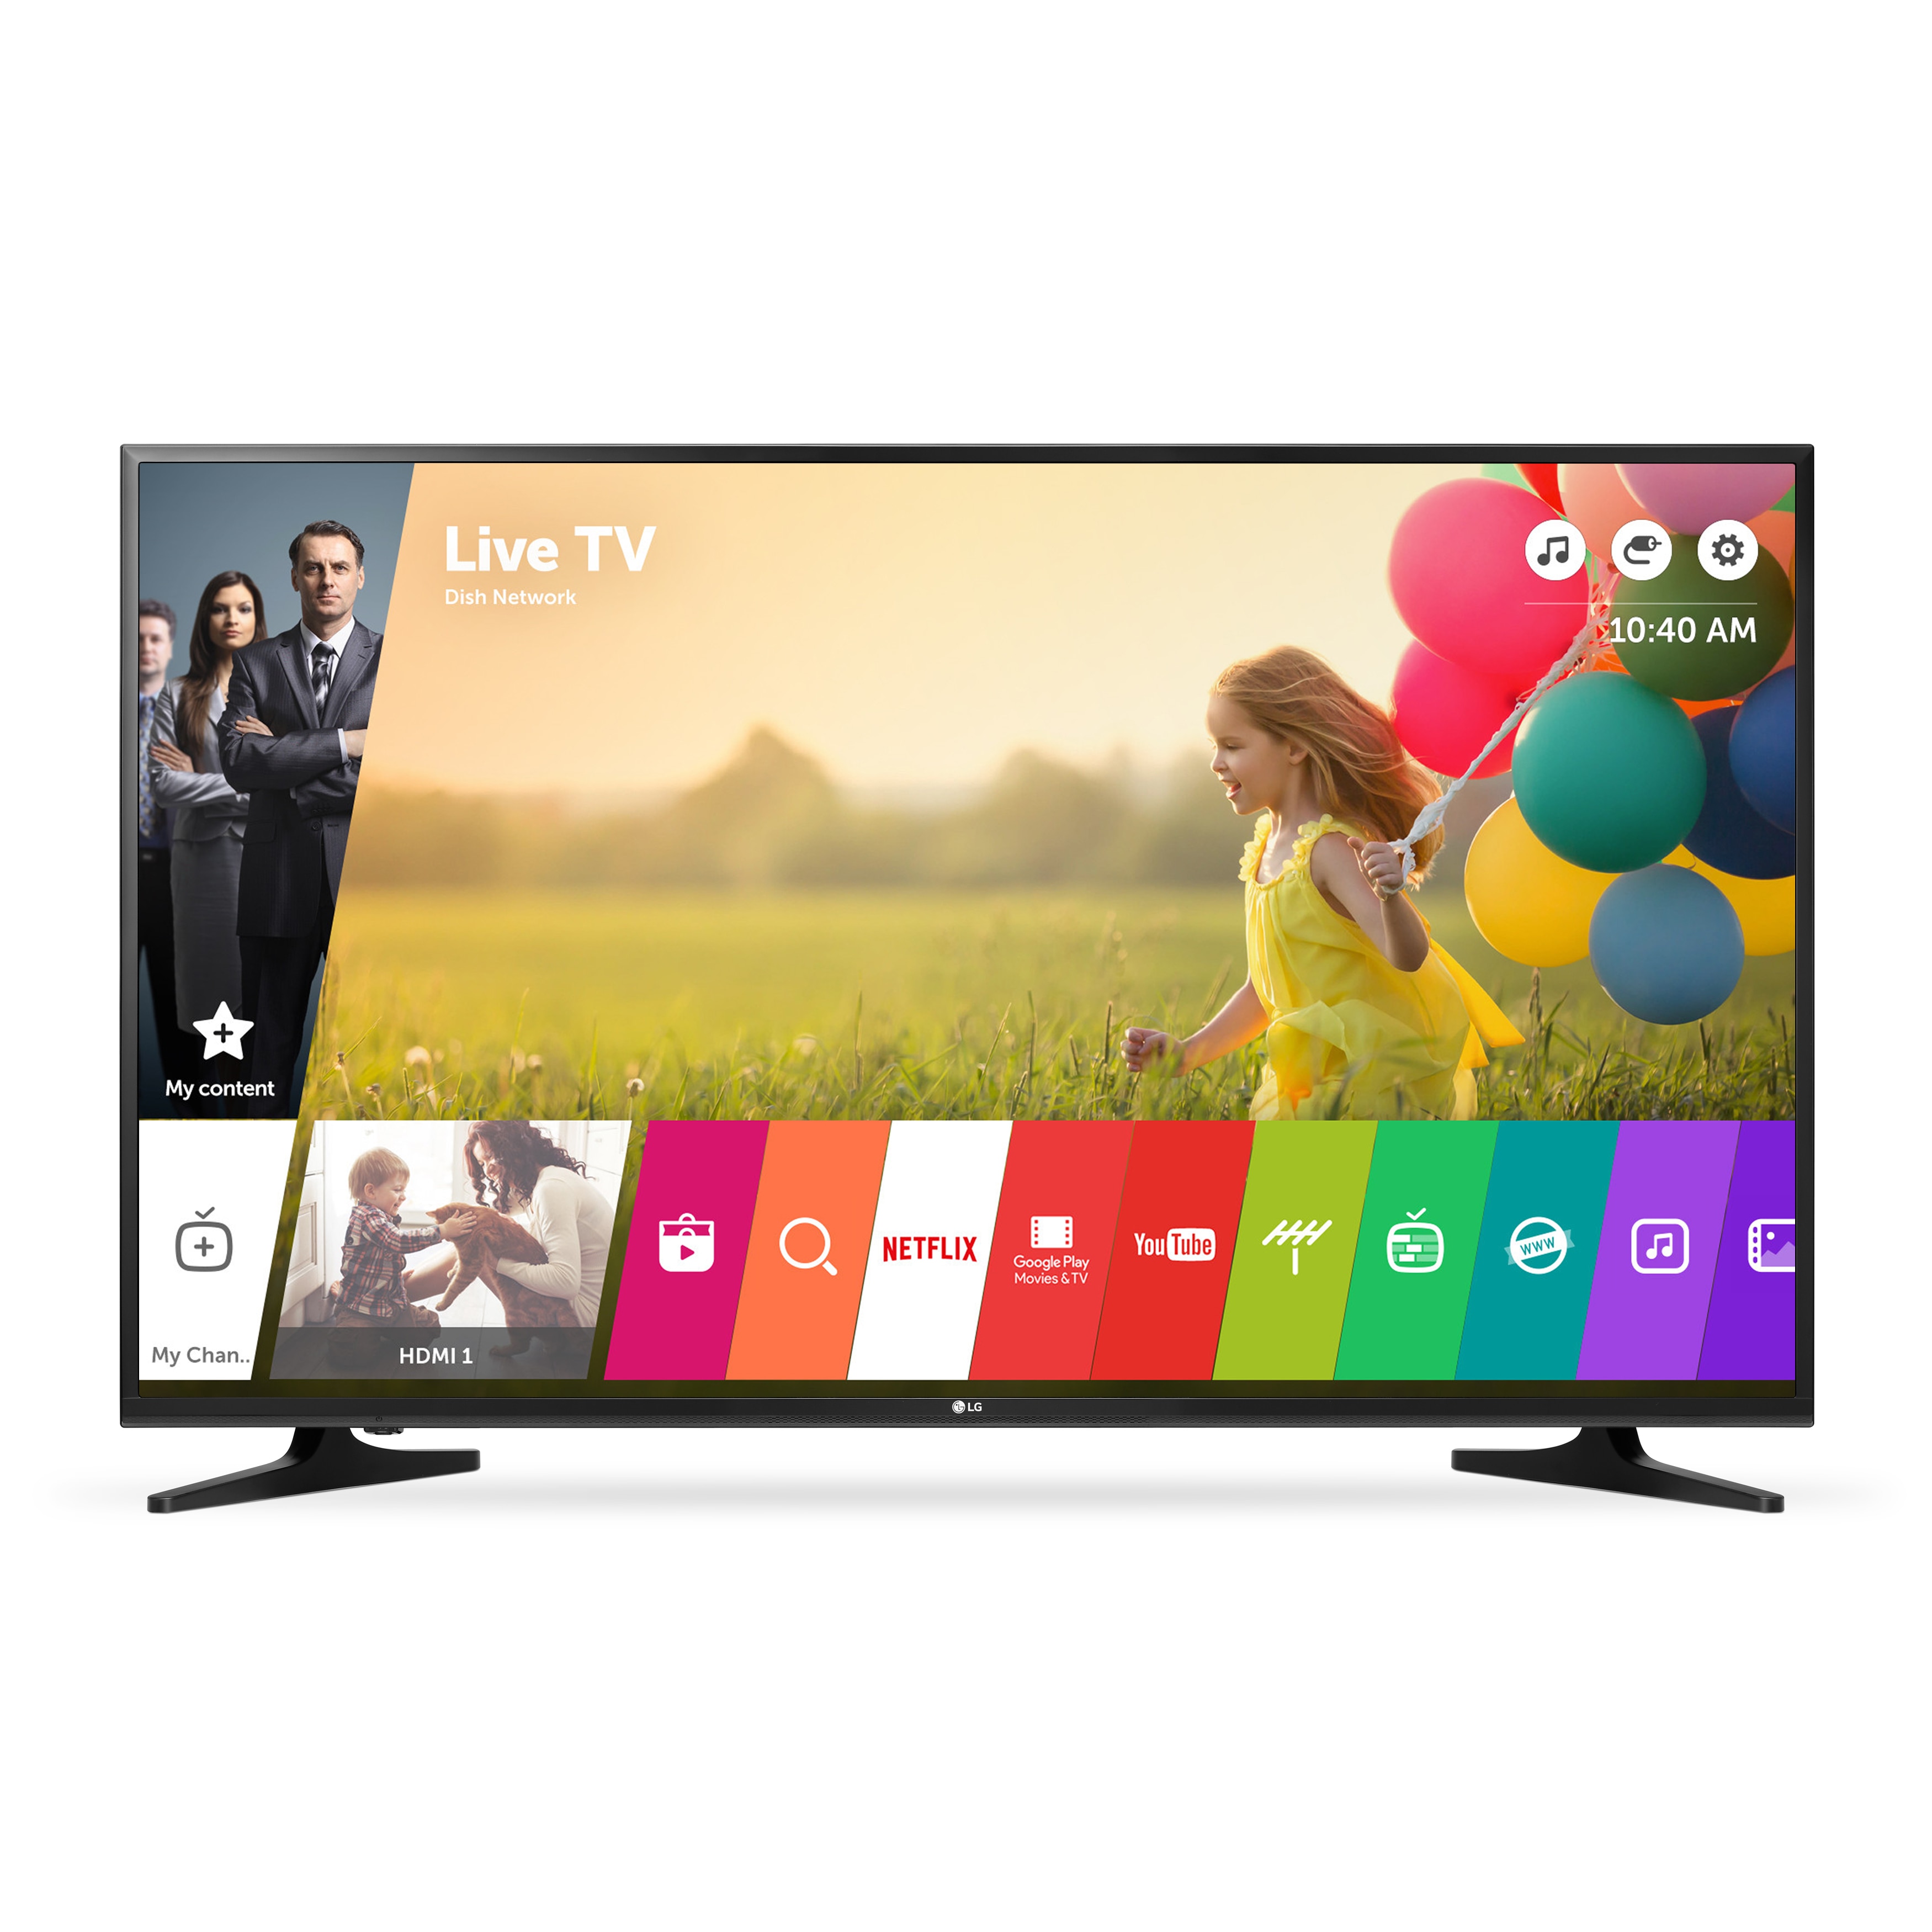 LG 50UH5500 50-inch Class 4K UHD LED Television With Smart TV